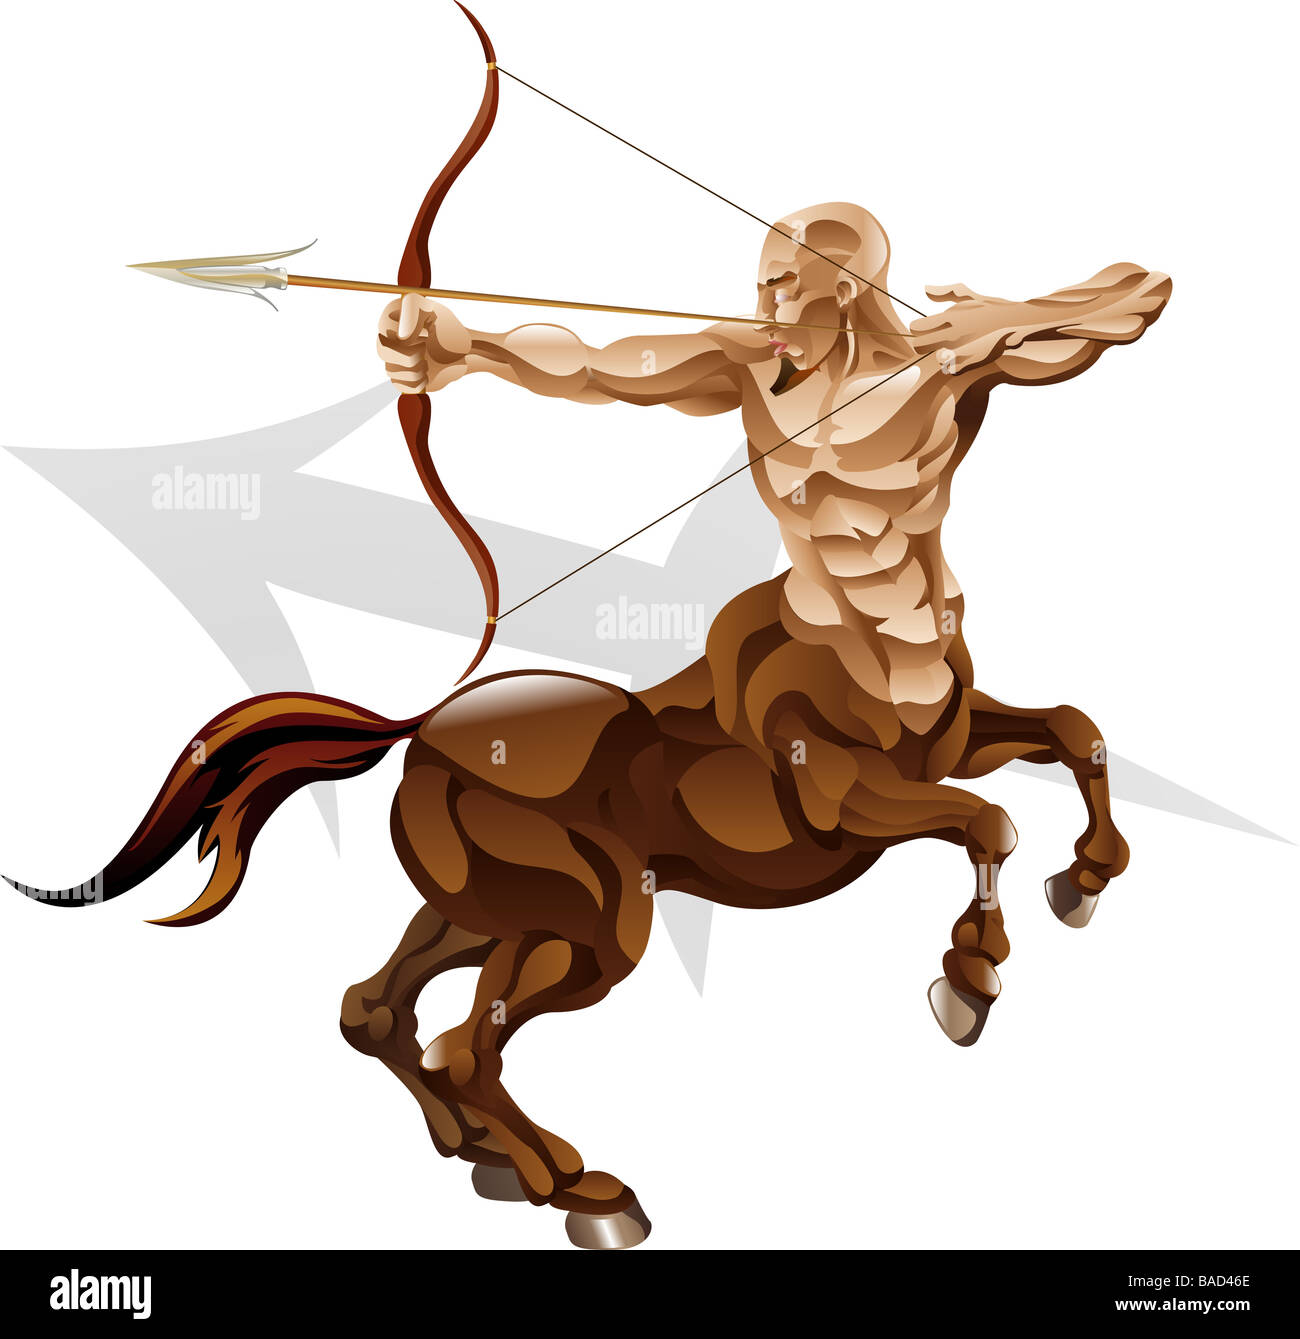 Illustration representing Sagittarius the archer star or birth sign Includes the symbol or icon in the background Stock Photo